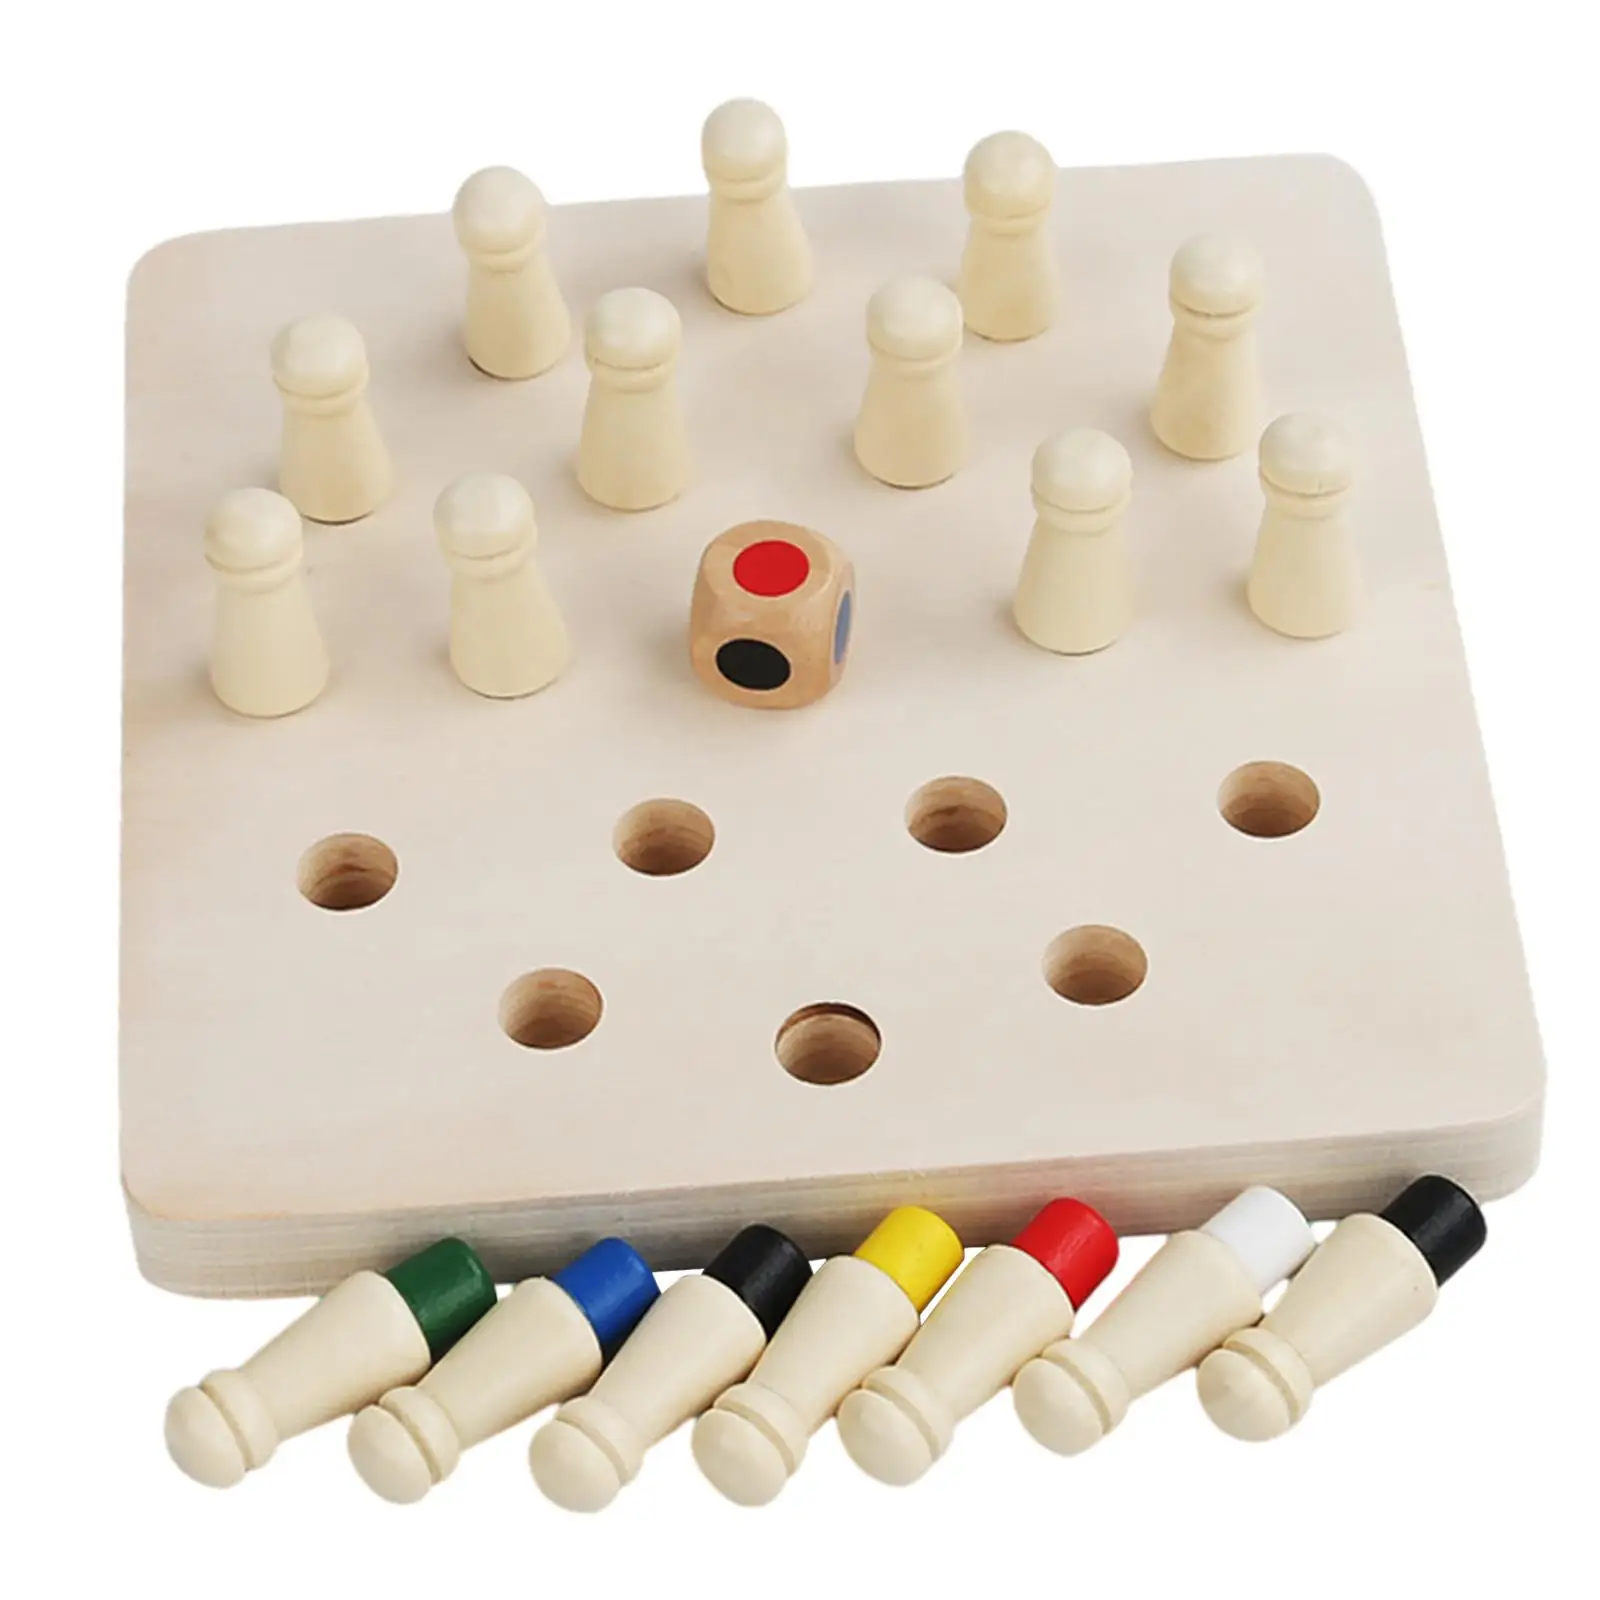 Memory Matching Chess Board Game Family Games Learning Activities Educational Toys Montessori for Girls Children Adults Toddlers